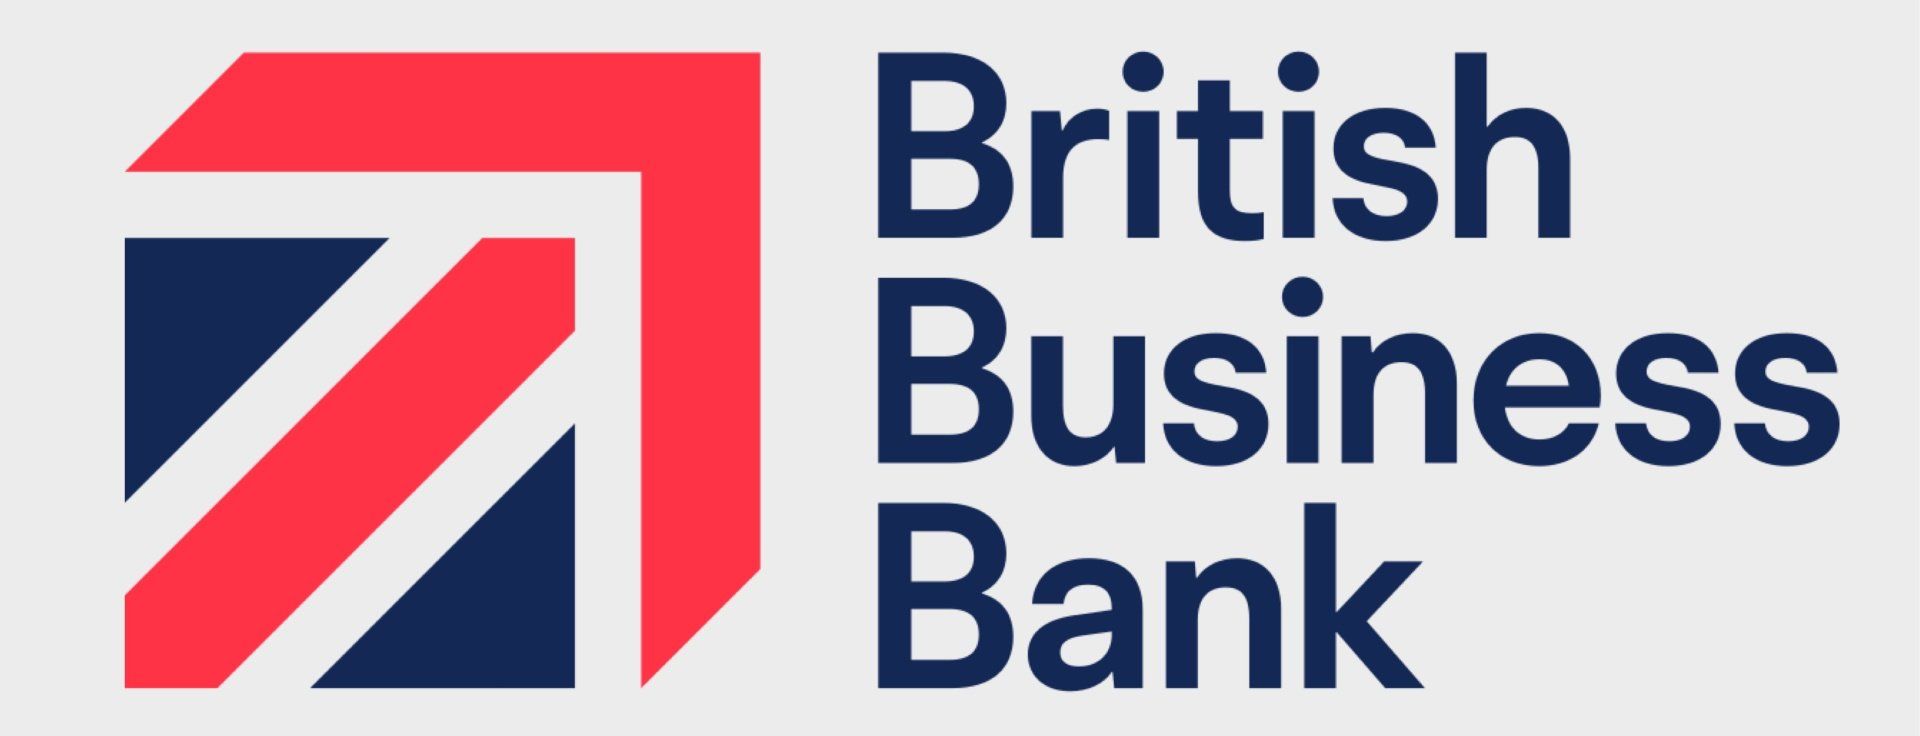 The logo for the british business bank is red , white and blue.